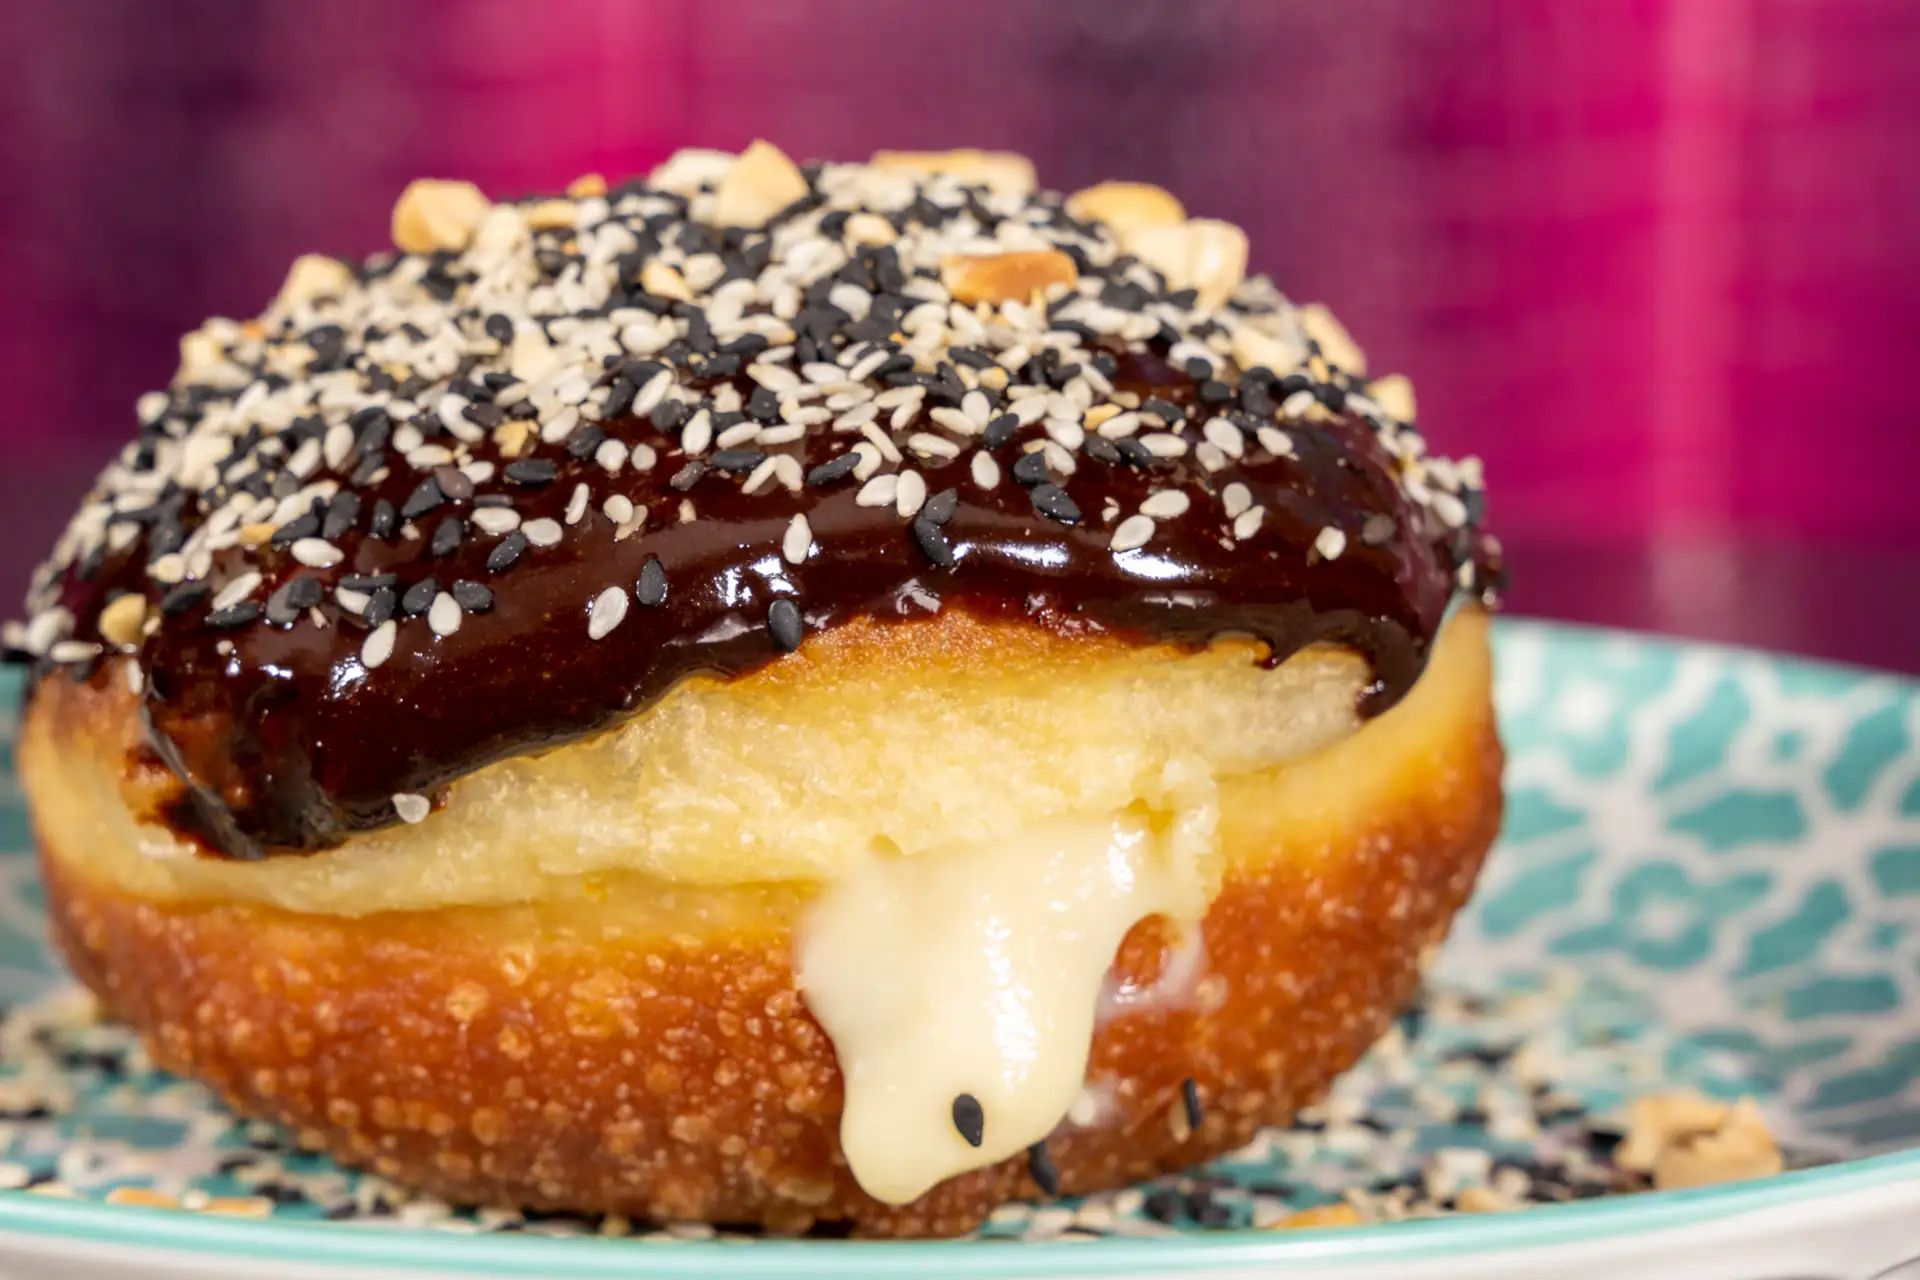 Bougie Donut at The Delta (Photo courtesy of The Delta)